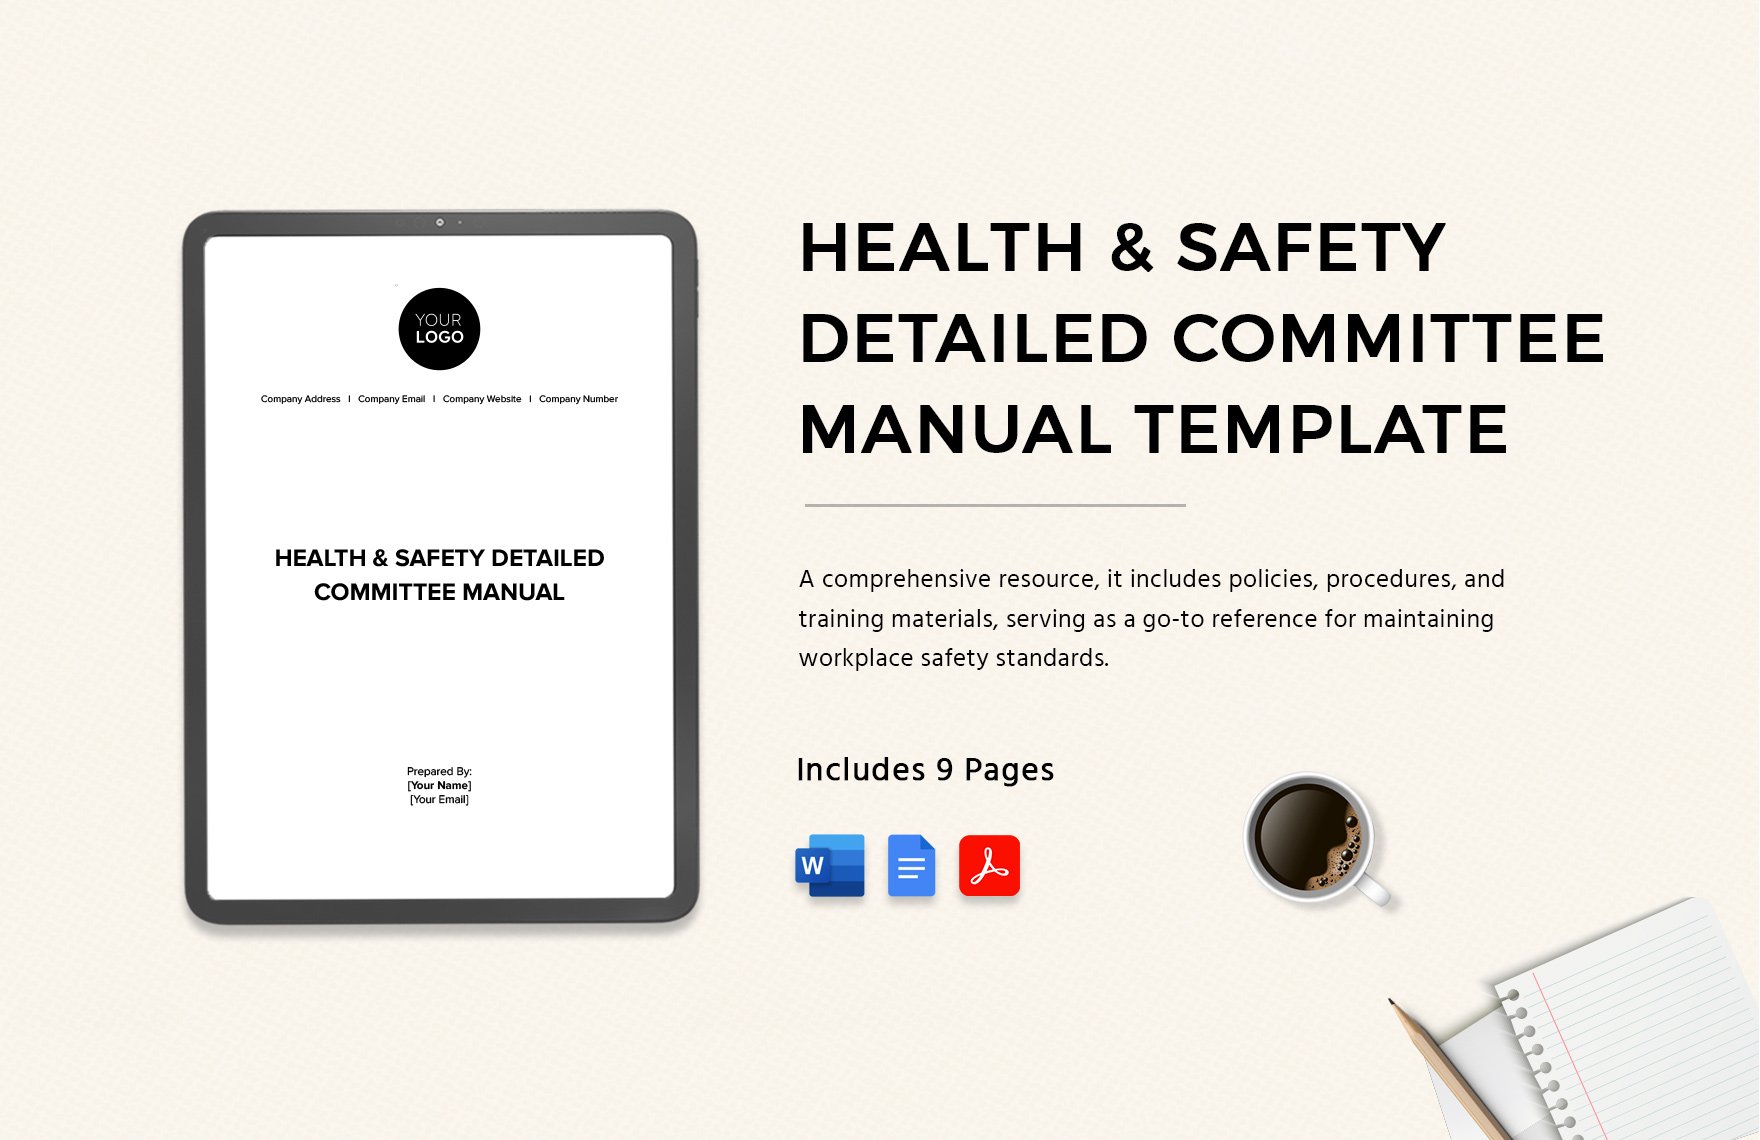 Health & Safety Detailed Committee Manual Template